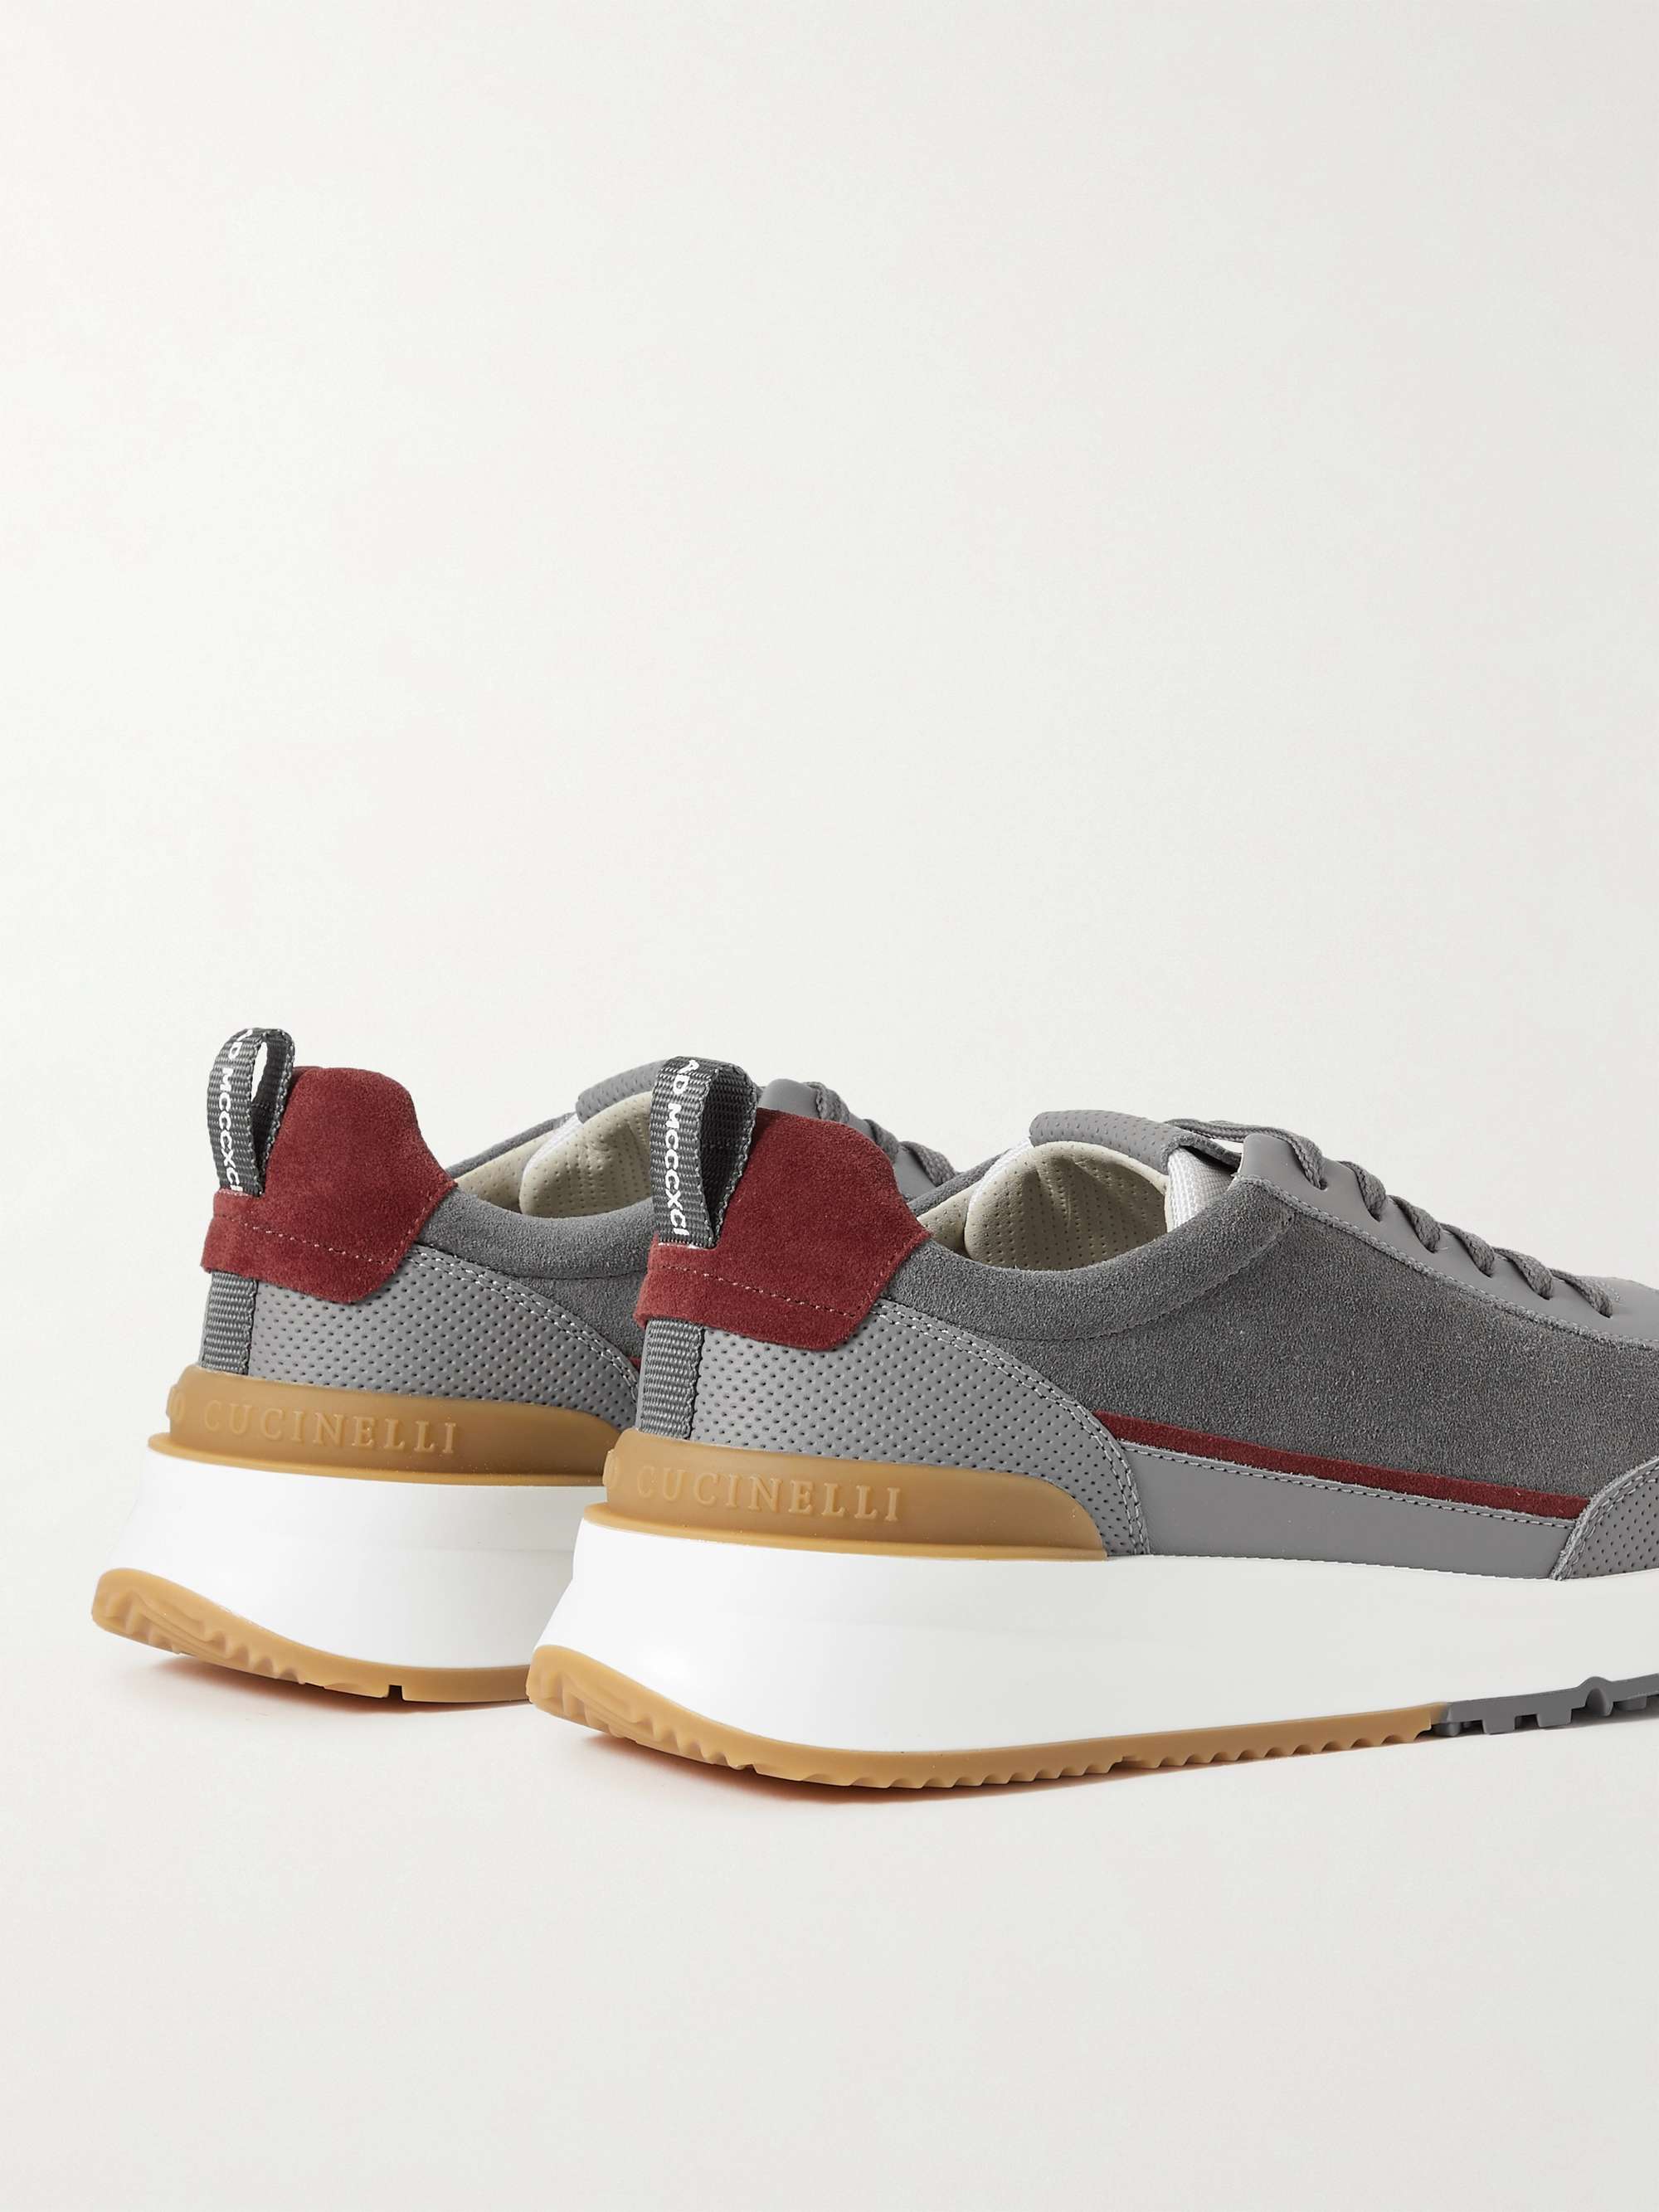 BRUNELLO CUCINELLI Leather-Trimmed Suede Sneakers